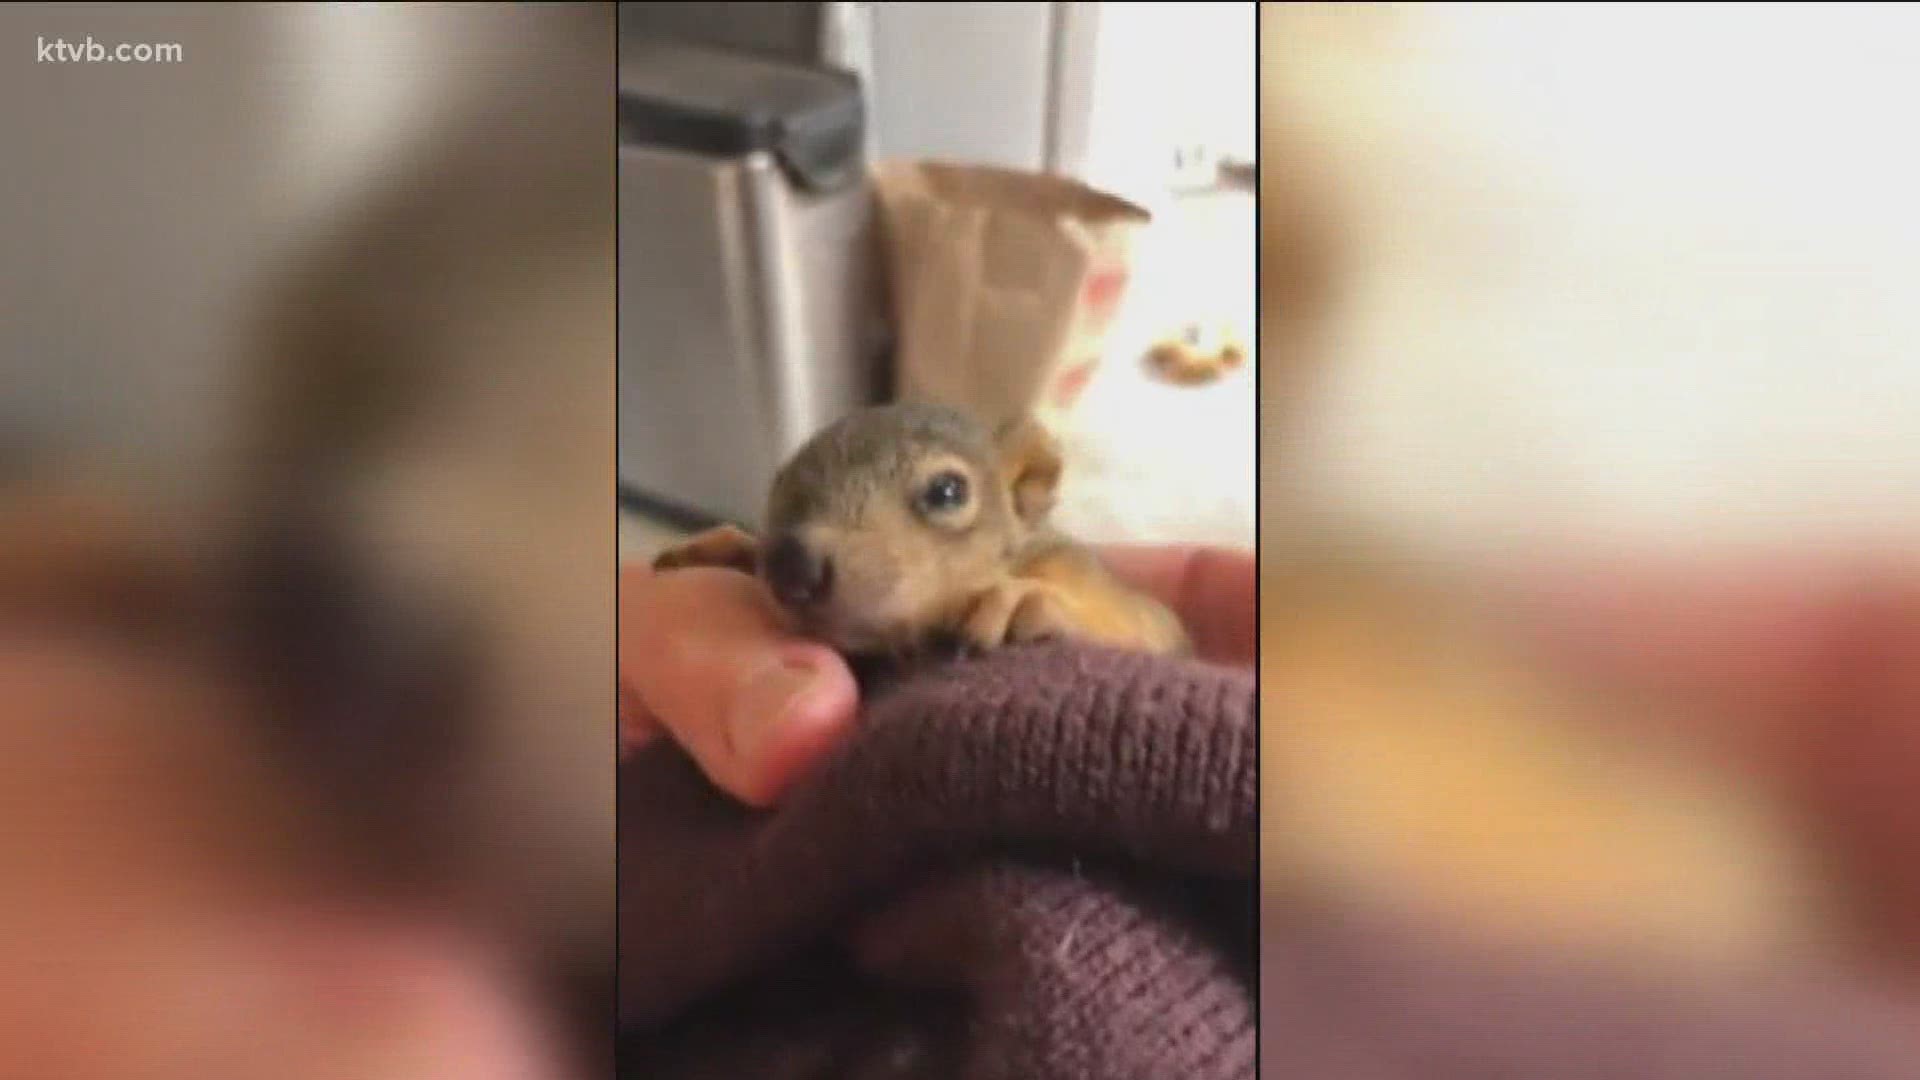 Jim and Patty Hamm named the squirrel Daisy, and allows her inside their house.